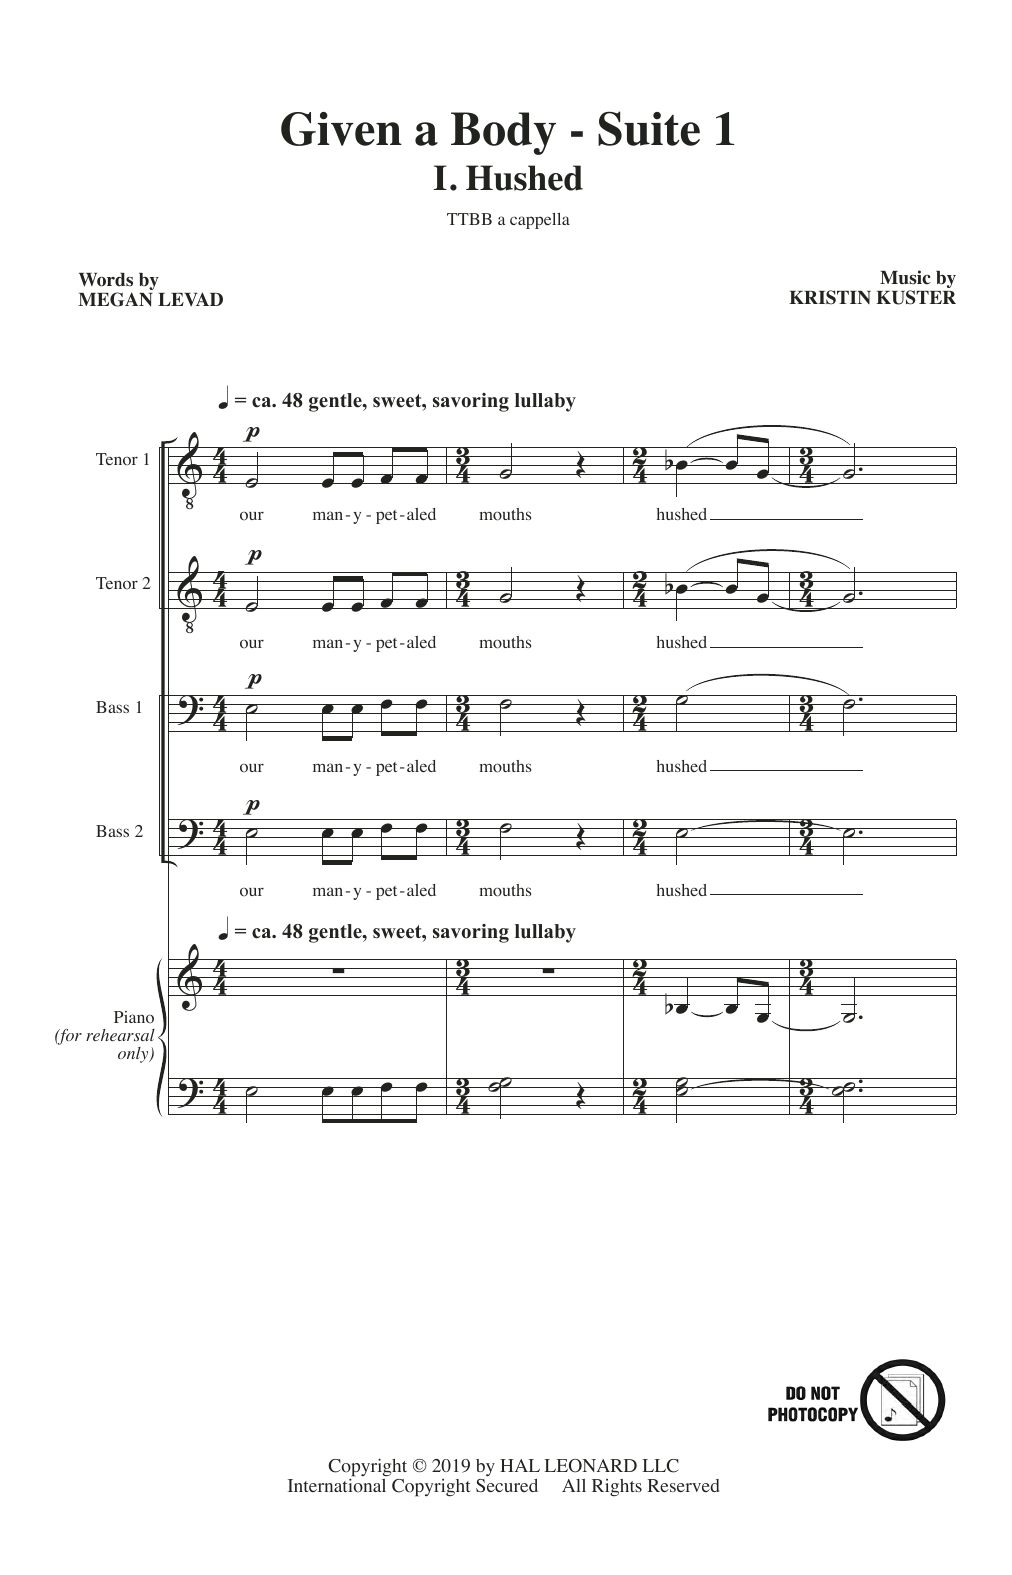 Download Megan Levad & Kristin Kuster Given A Body: Suite 1 Sheet Music